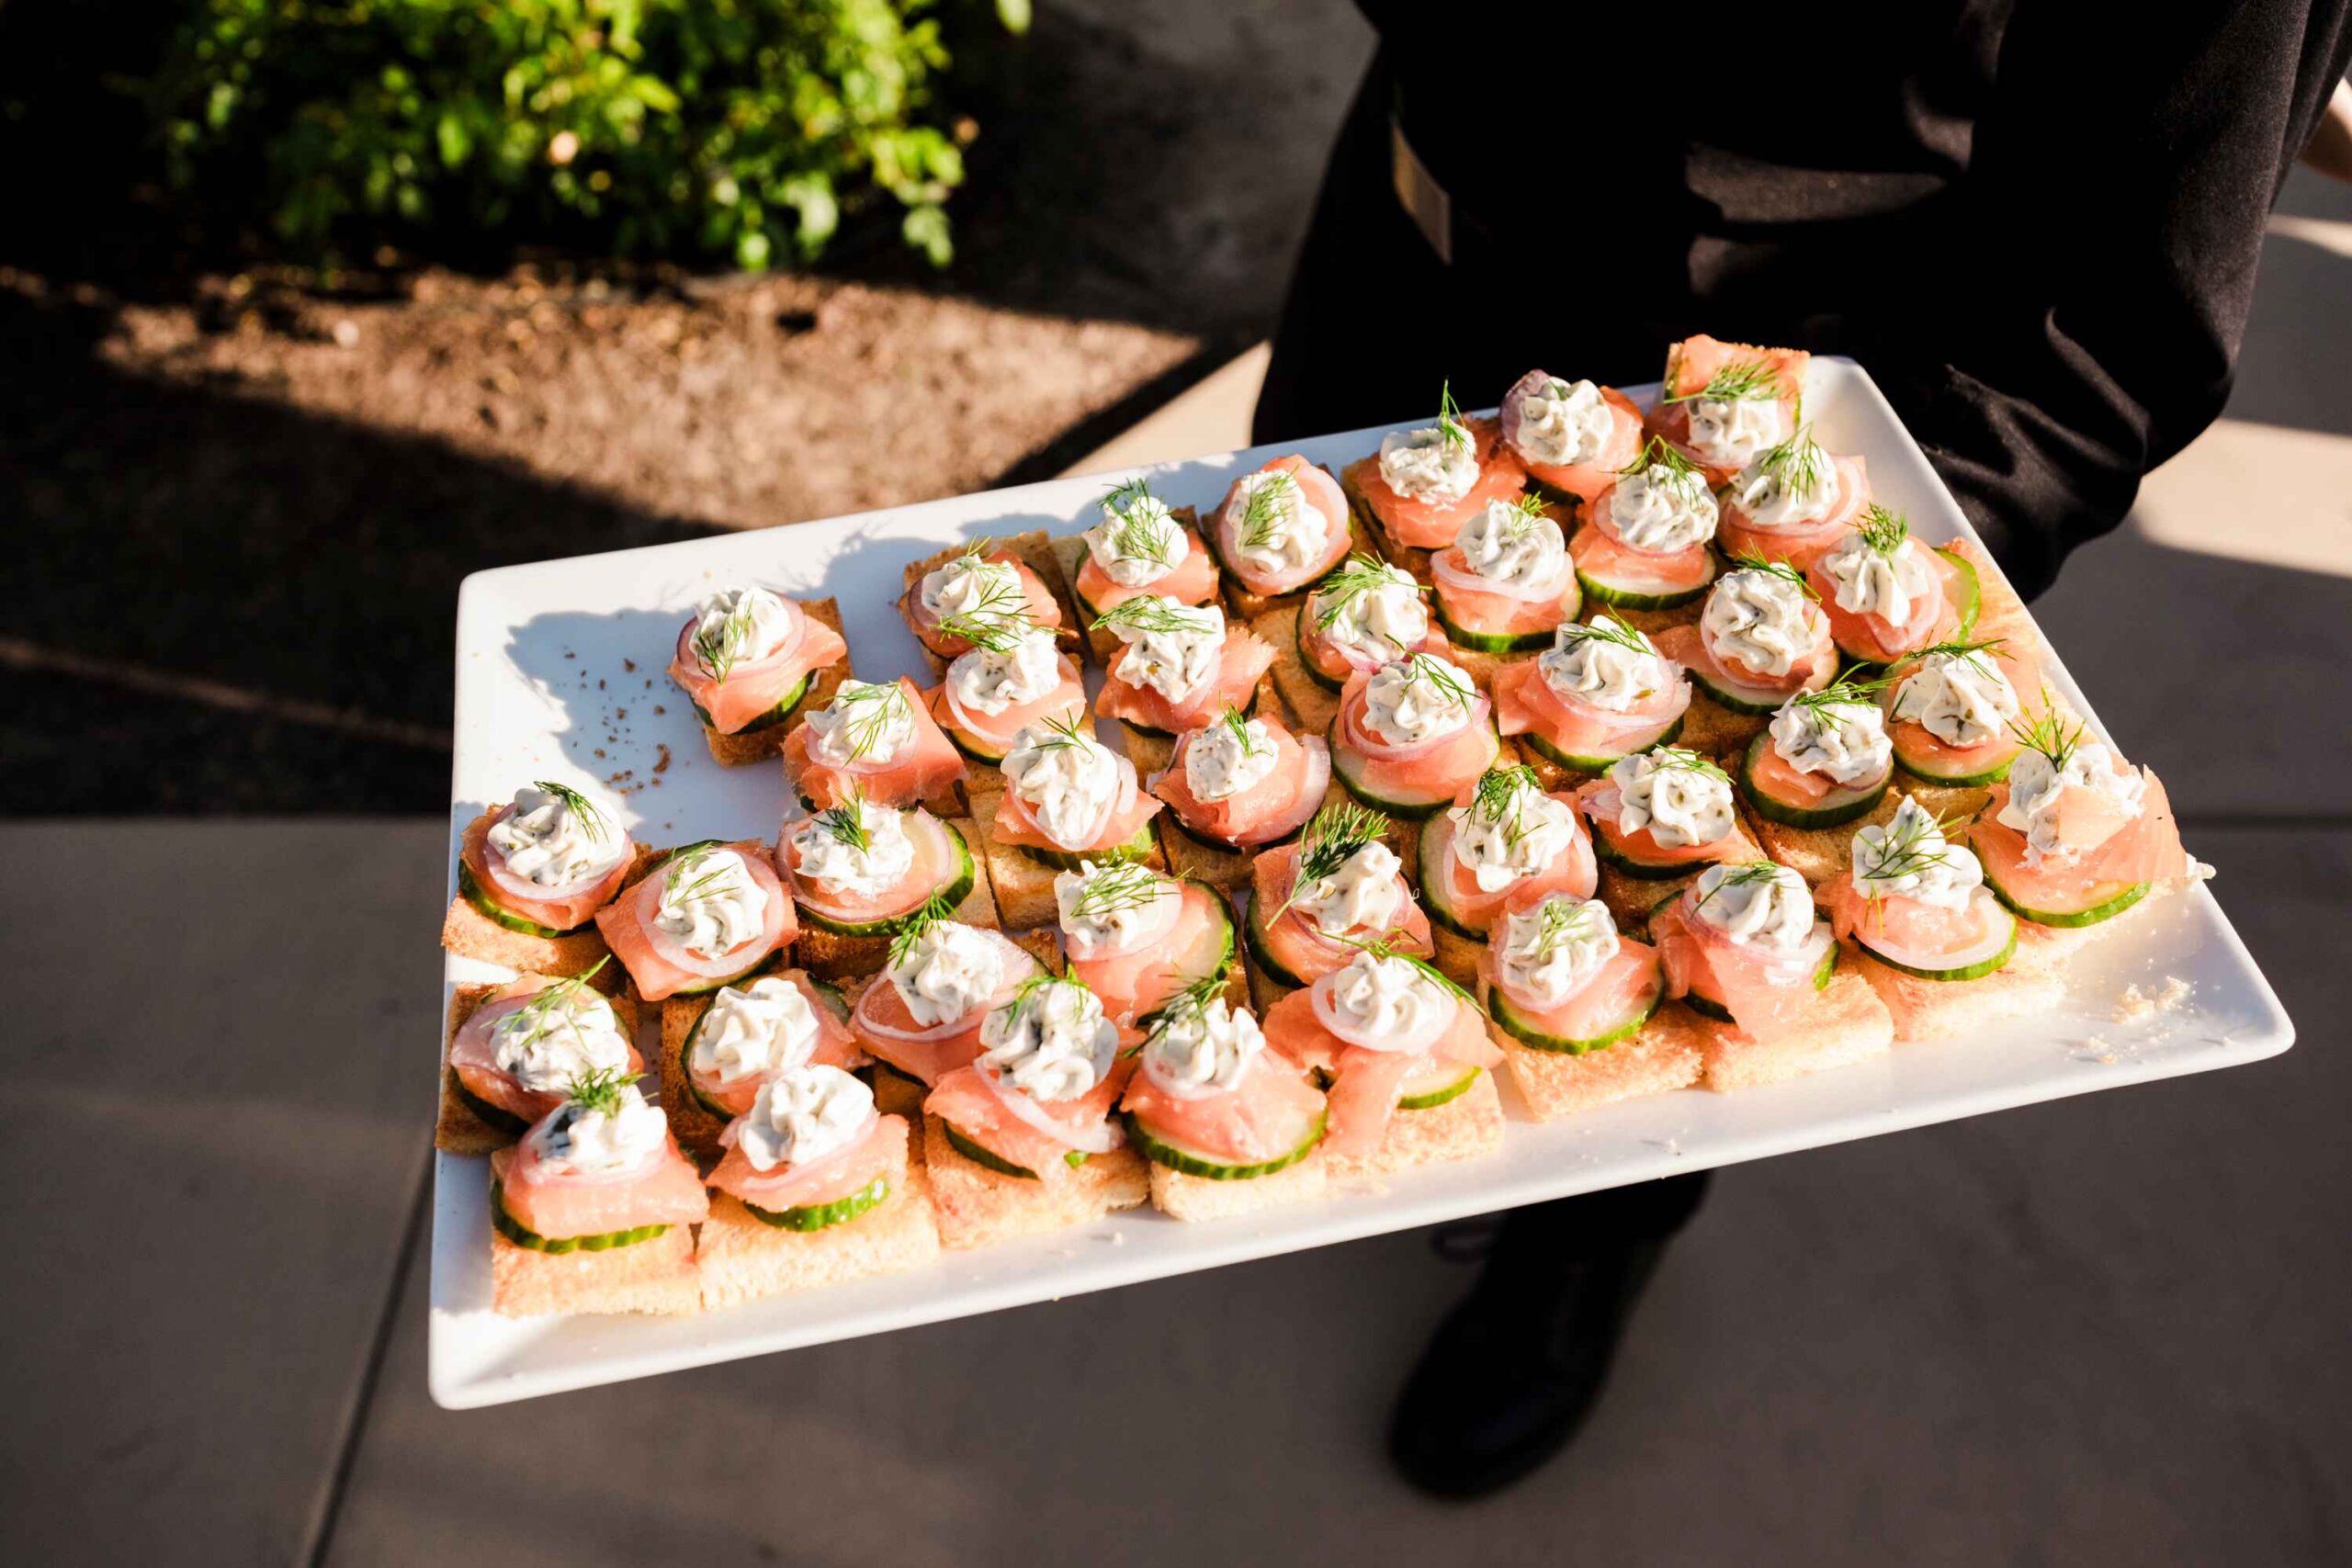 a platter full of hors d'oeuvres